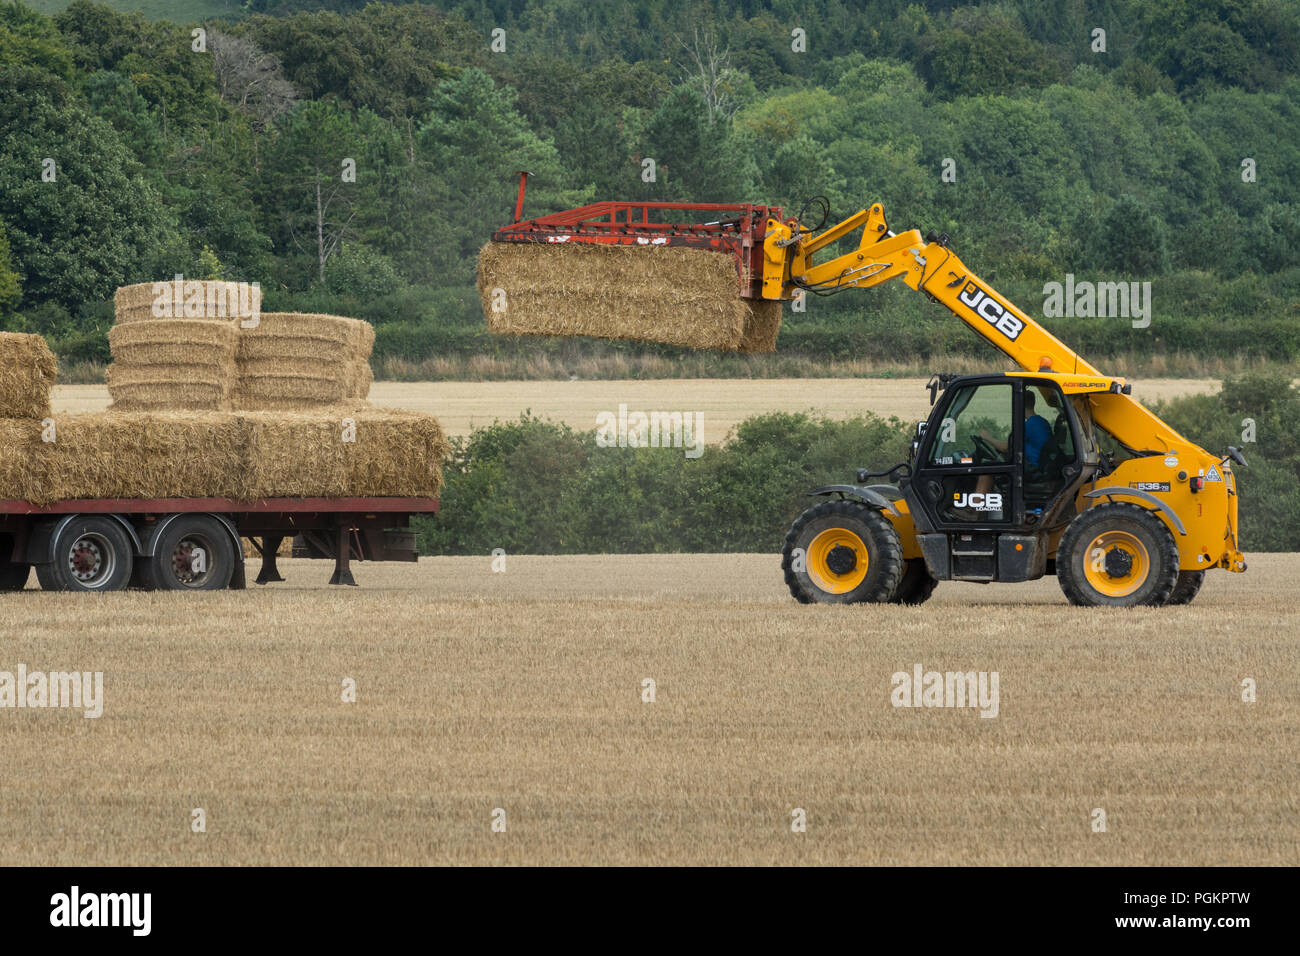 Bringing in the harvest. A tractor loading bales of straw onto a trailer in a field in Hampshire, UK, during August Stock Photo